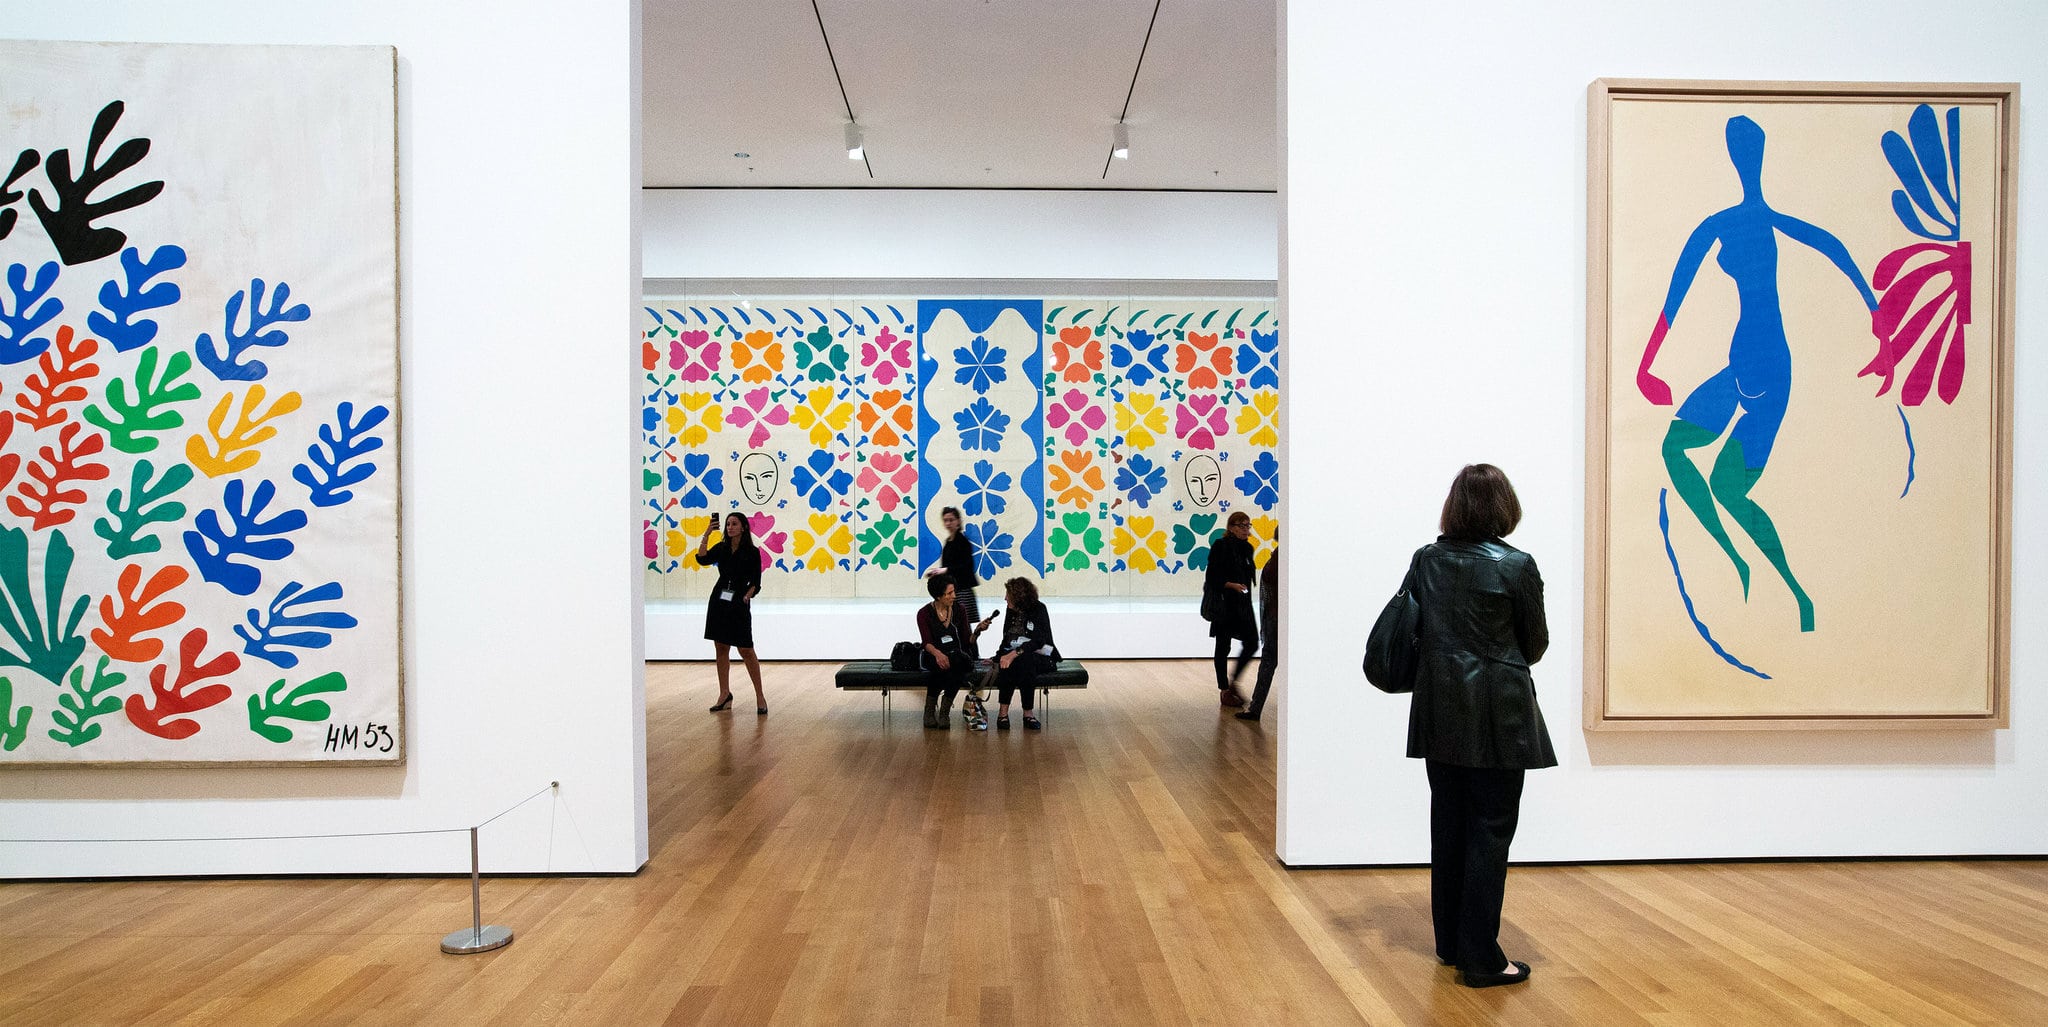 MoMA Free Online Art Classes Are Now Available